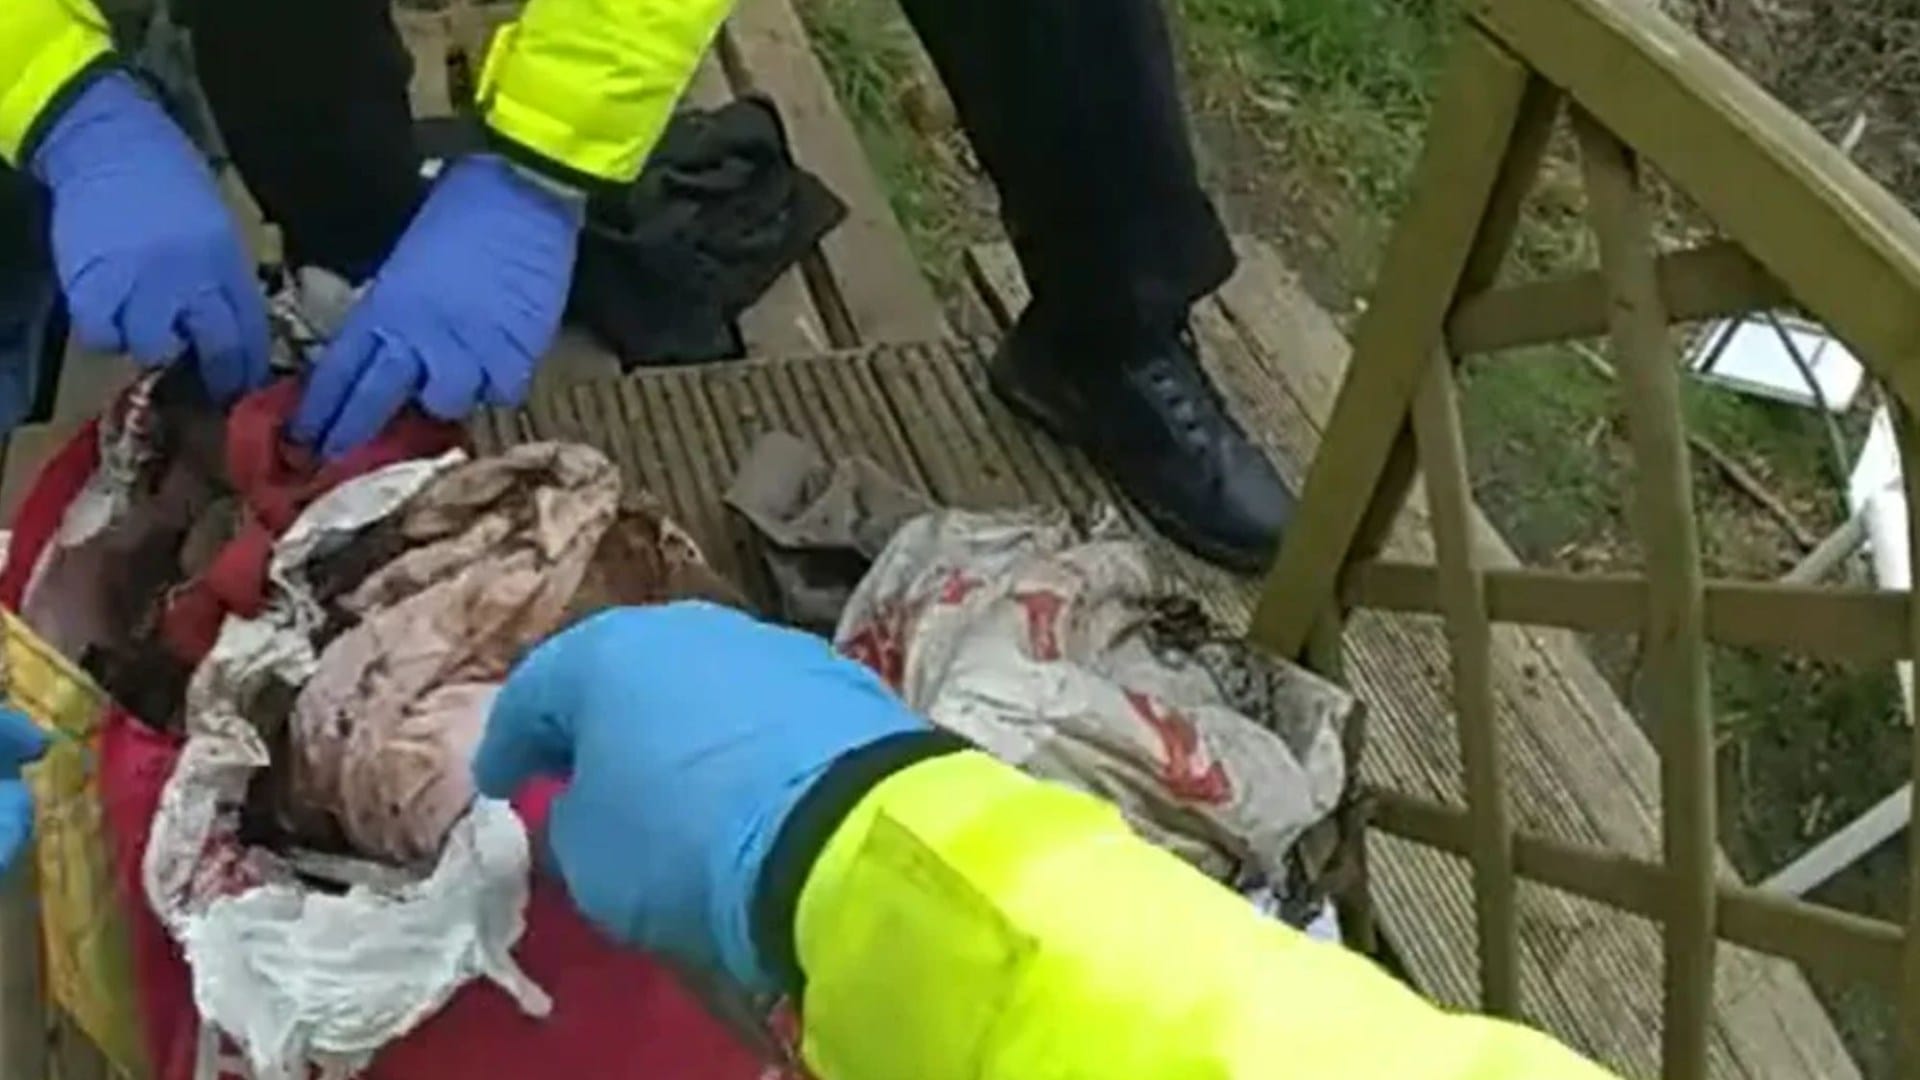 Harrowing moment cops find remains of Constance Marten's baby Victoria stuffed in Lidl bag filled with rubbish